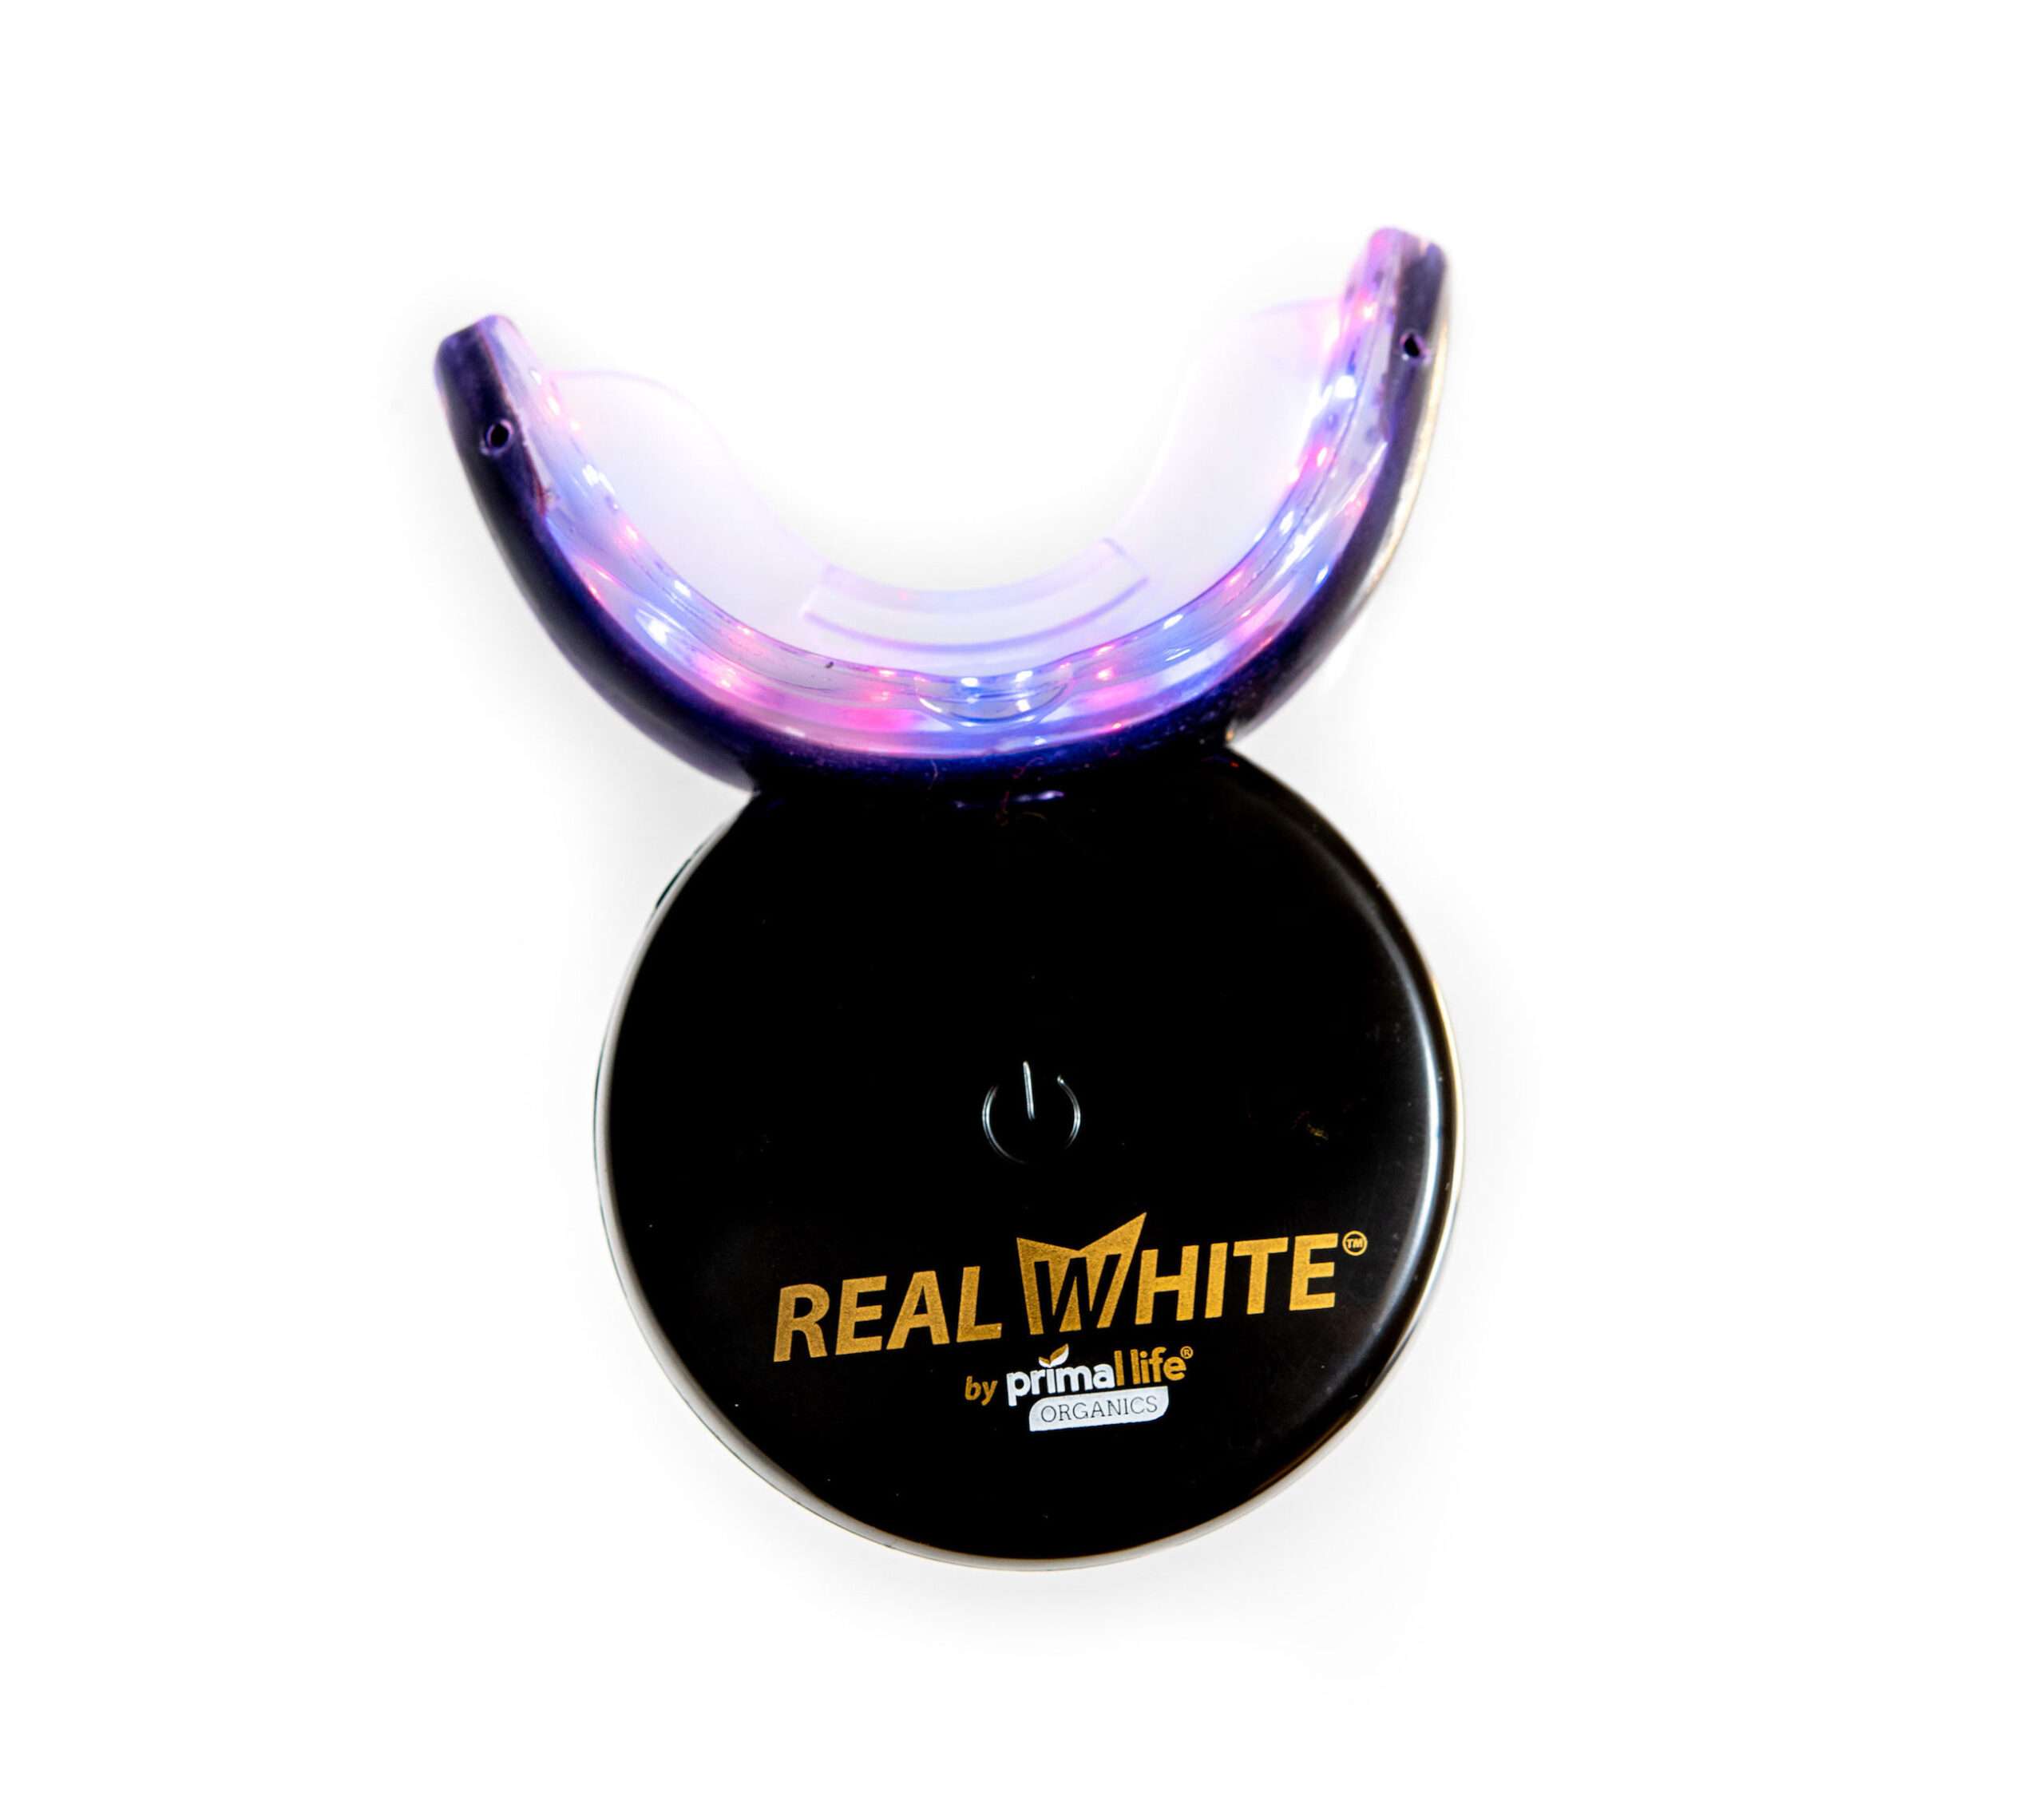 LED Teeth Whitening Device by primal life